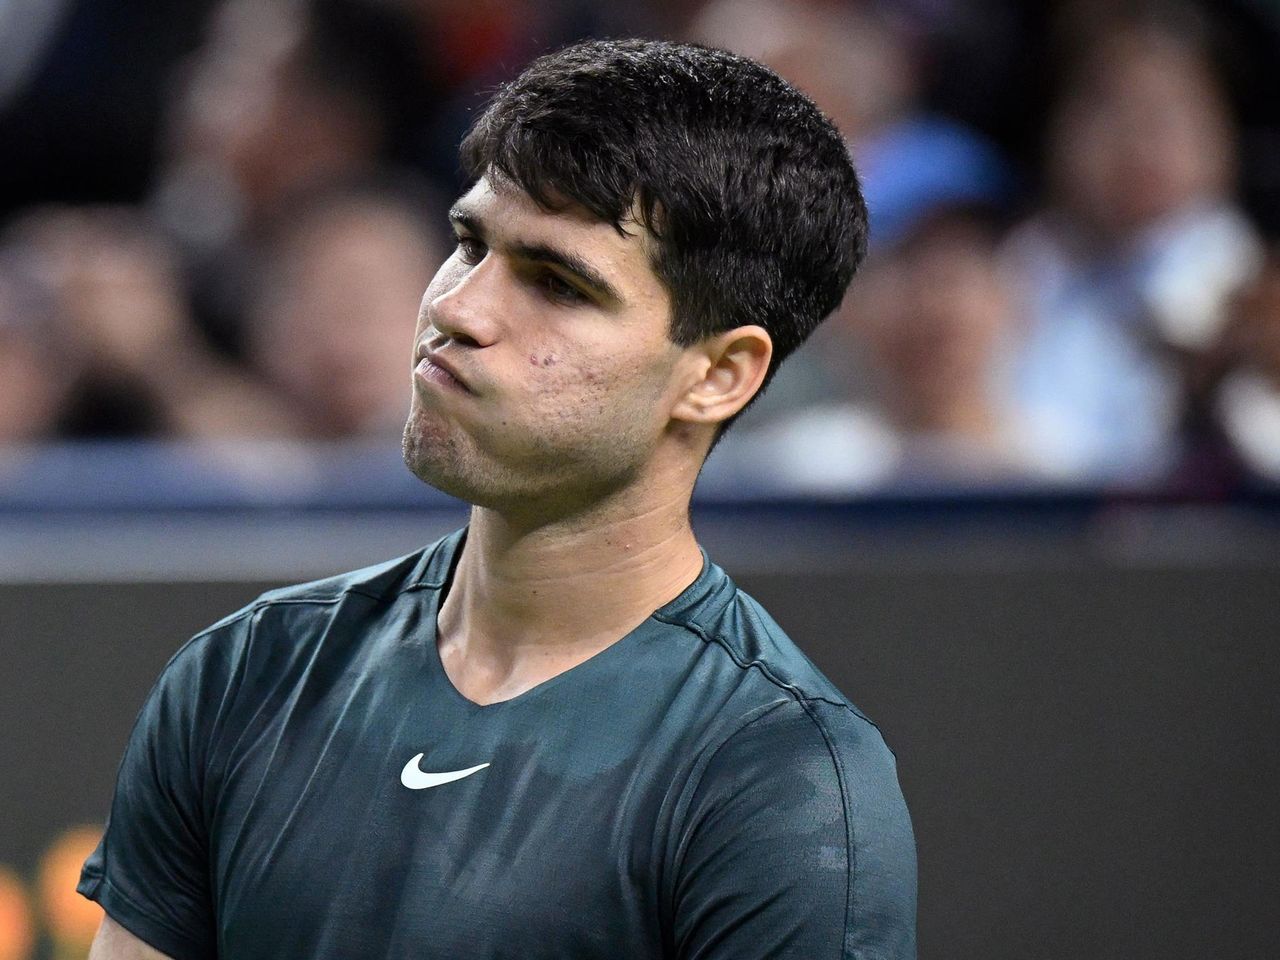 Alcaraz loses against Dimitrov and misses out on quarter finals, world number  one spot unlikely - AS USA